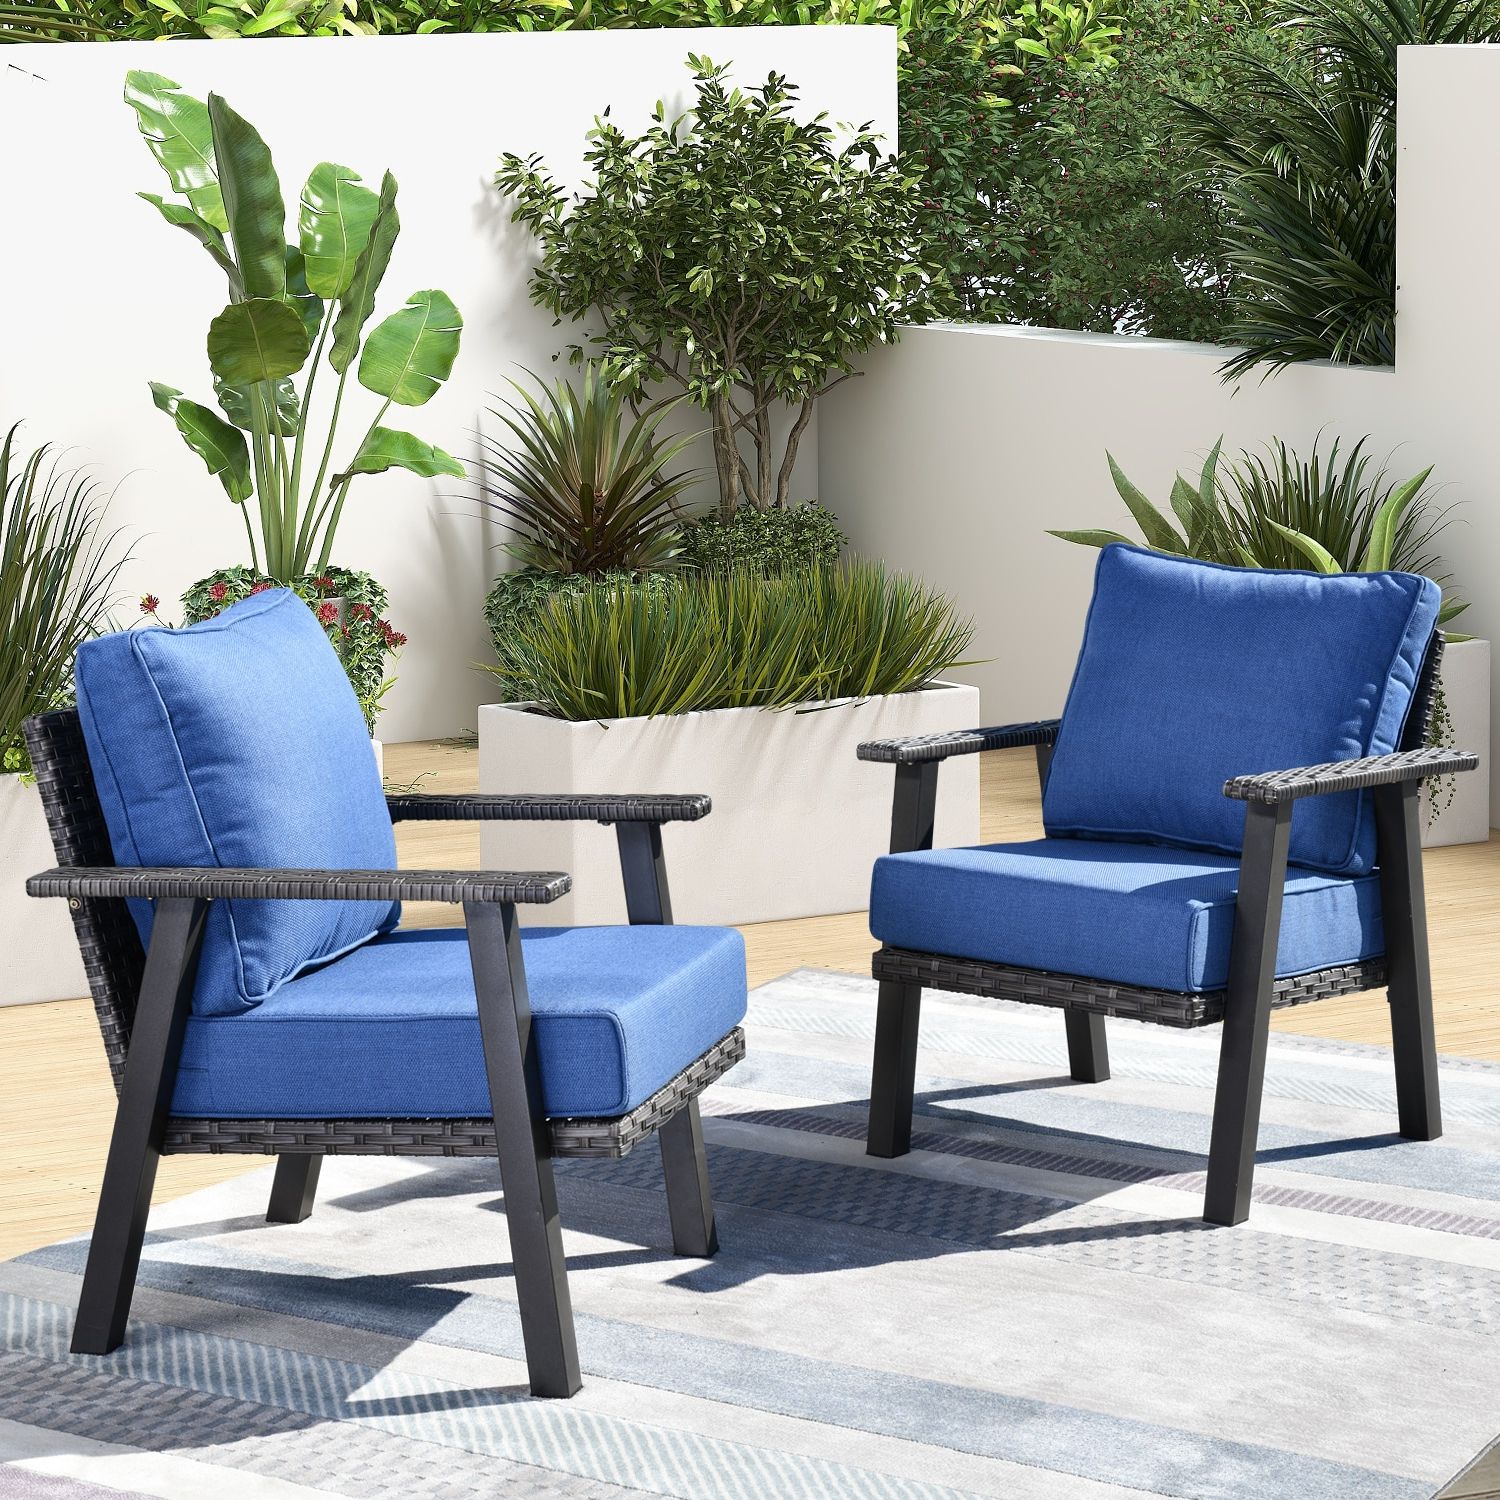 Xizzi Pisces Set Of 2 Wicker Blue Cushion Iron Frame Stationary Conversation  Chair(s) With Blue Cushioned Seat In The Patio Chairs Department At  Lowes With Regard To Popular Outdoor Stationary Chat Set (View 5 of 15)